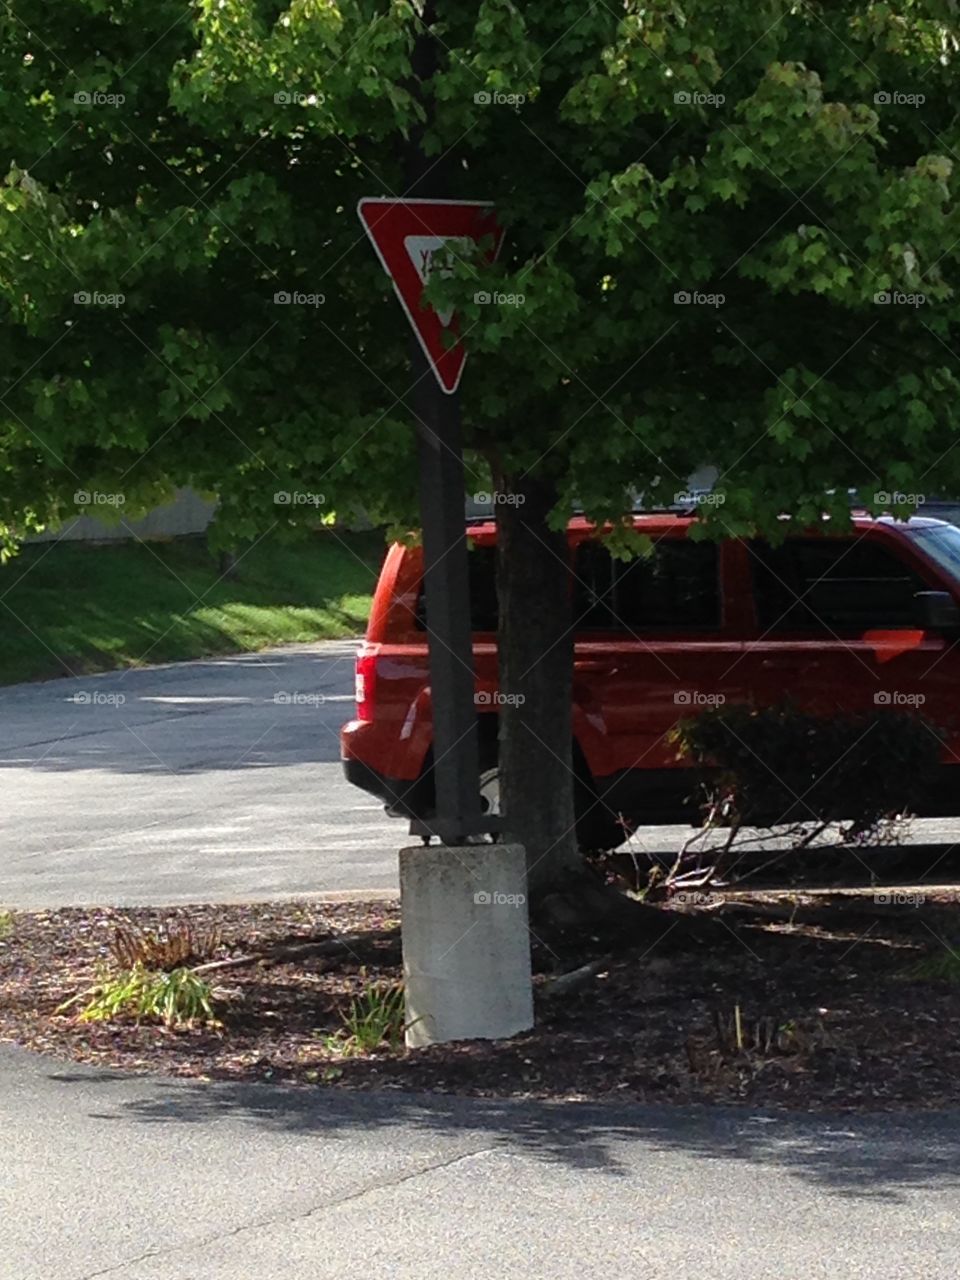 Yield sign hidden by tree overgrowth is a traffic safety hazard.